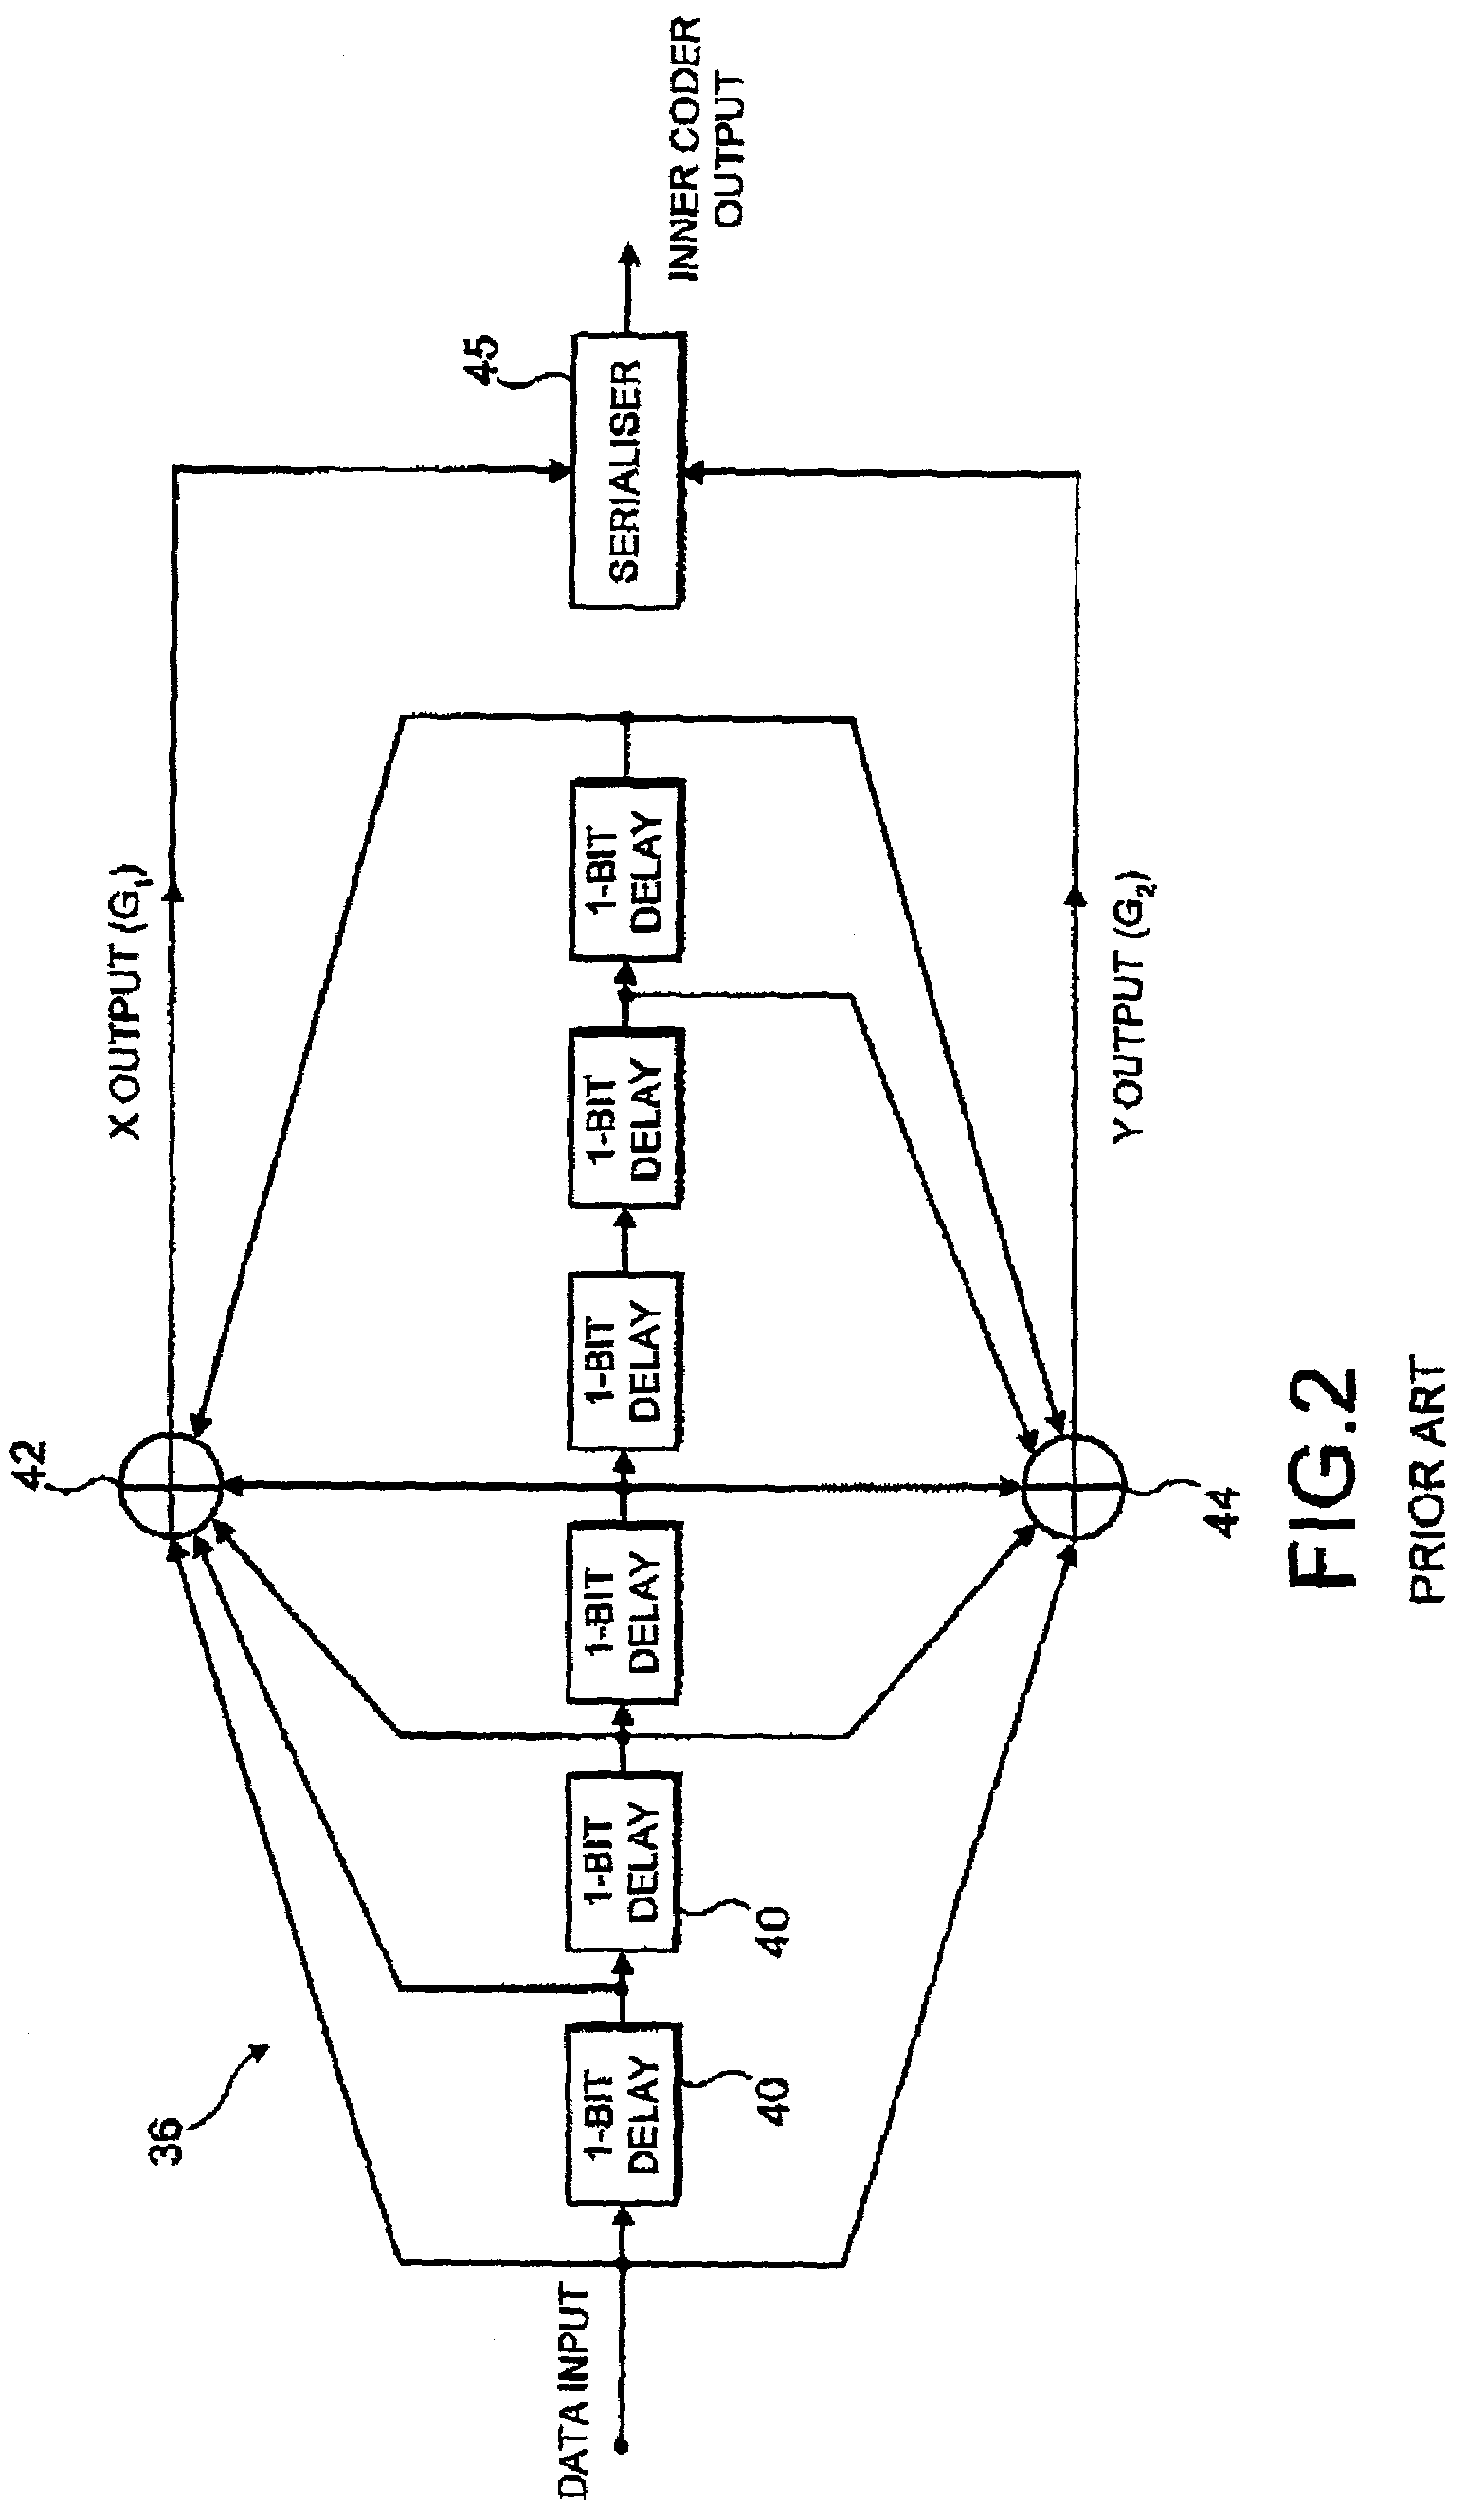 Decoders for many-carrier signals, in particular in DVB-T receivers